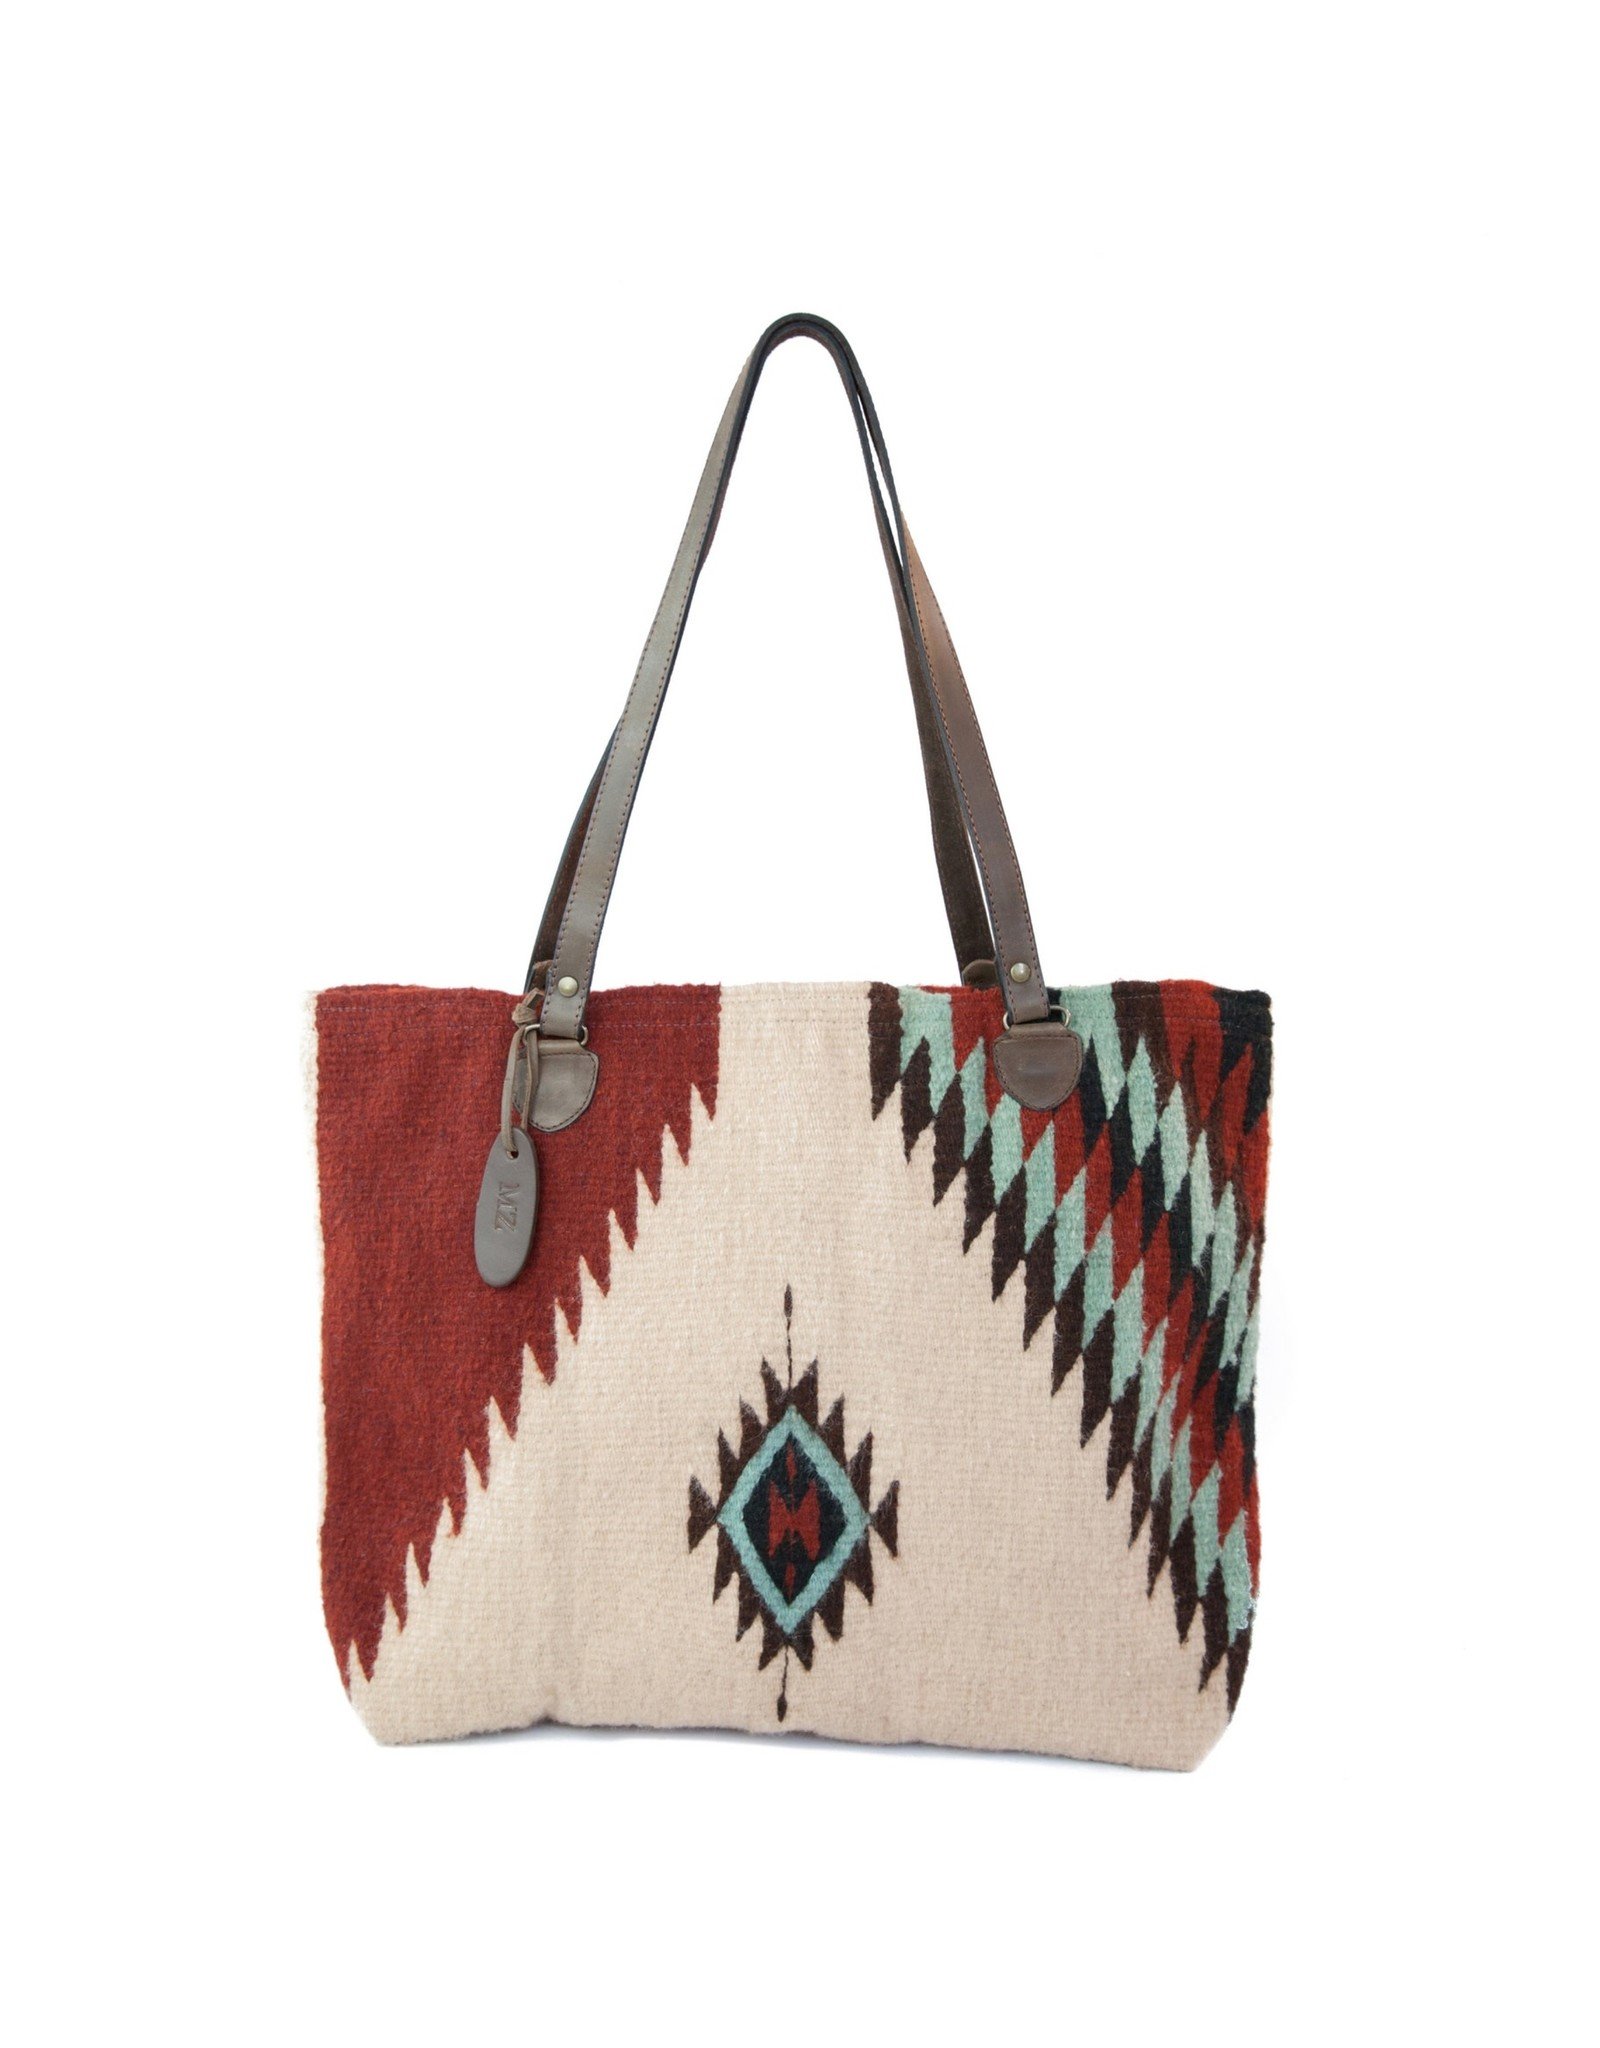 MZ Turquoise & Ruby Tote, Mexico